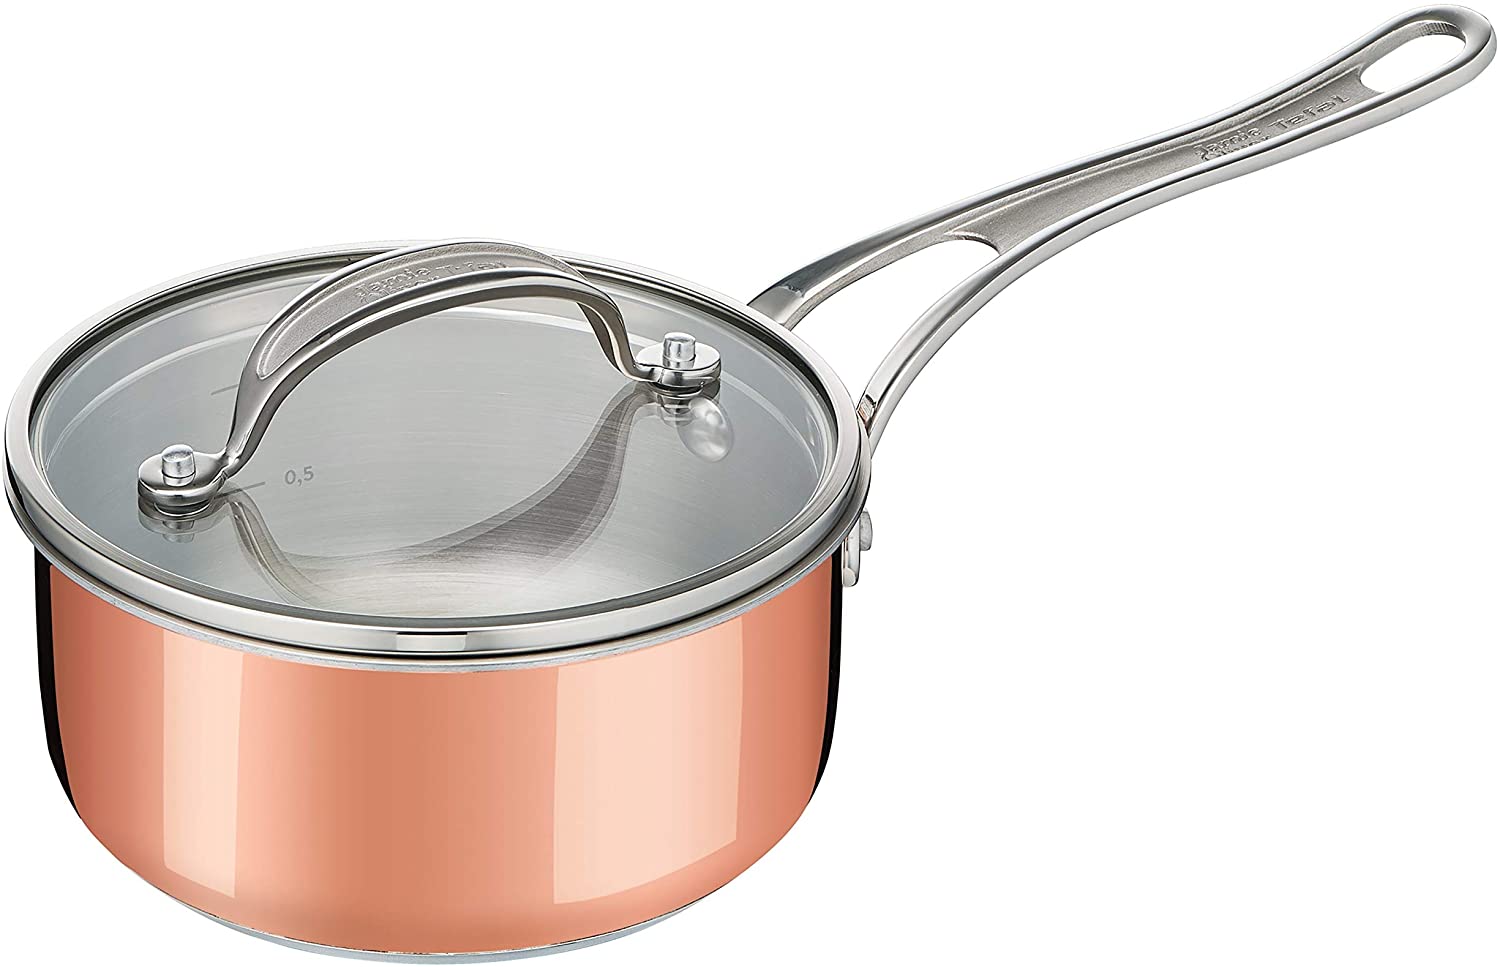 Tefal E49022 Jamie Oliver Triply Copper Saucepan with Glass Lid, Three Layer Material (Stainless Steel / Aluminium / Copper), 16 cm